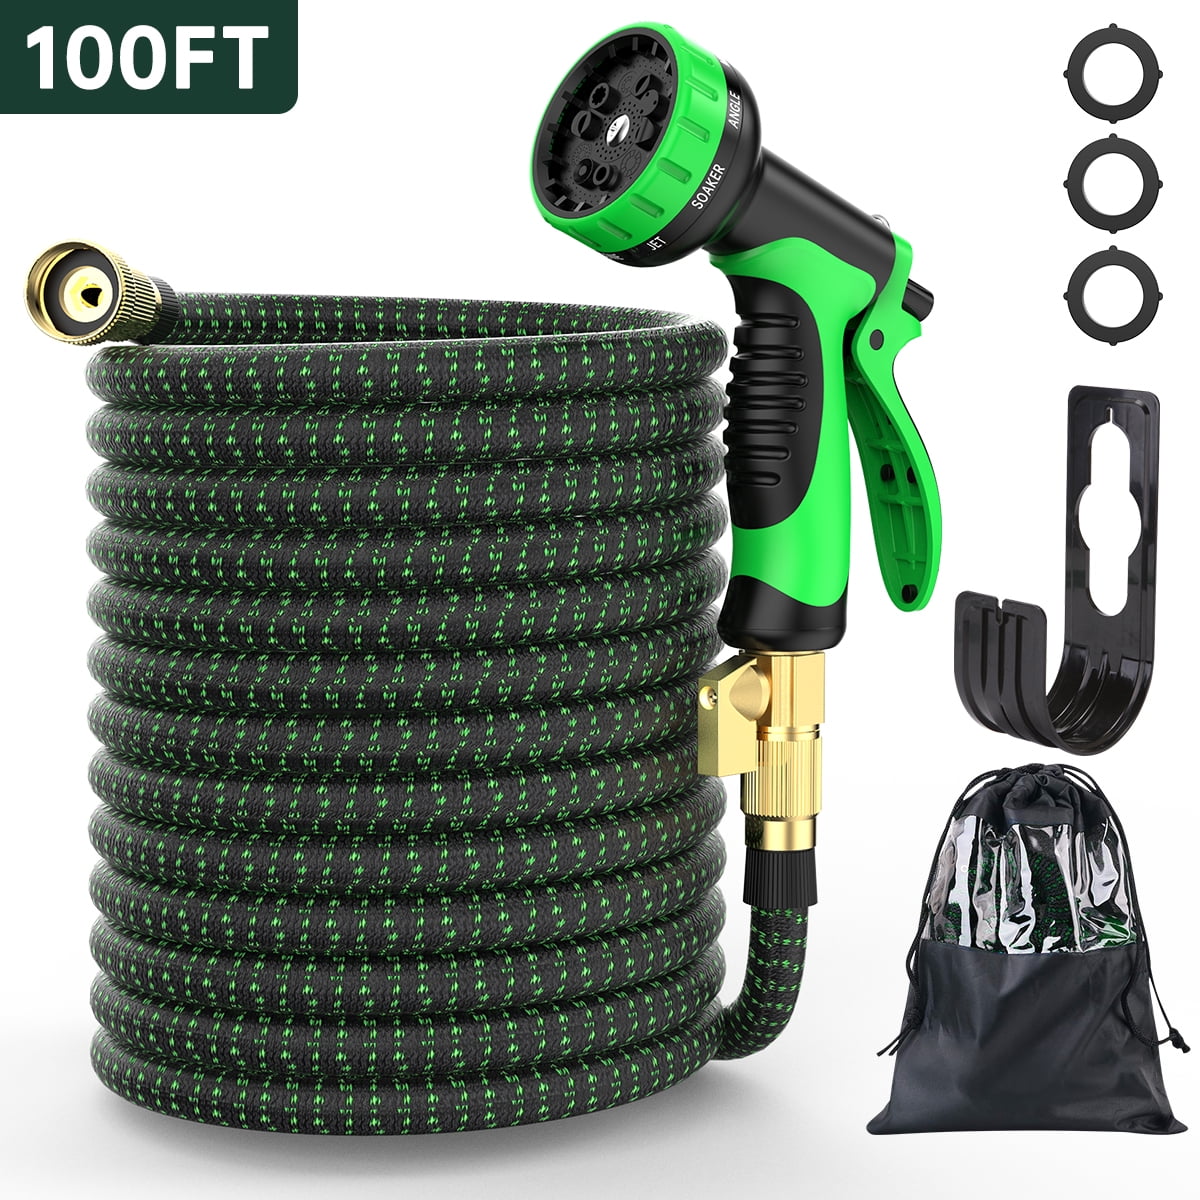 100FT Flexible Hose for Washing and Watering Lightweight Water Hose with Durable 3-Layers Latex Core & 3/4 Solid Brass Fittings 100FT Expandable Garden Hose with 9 Function High Pressure Nozzle